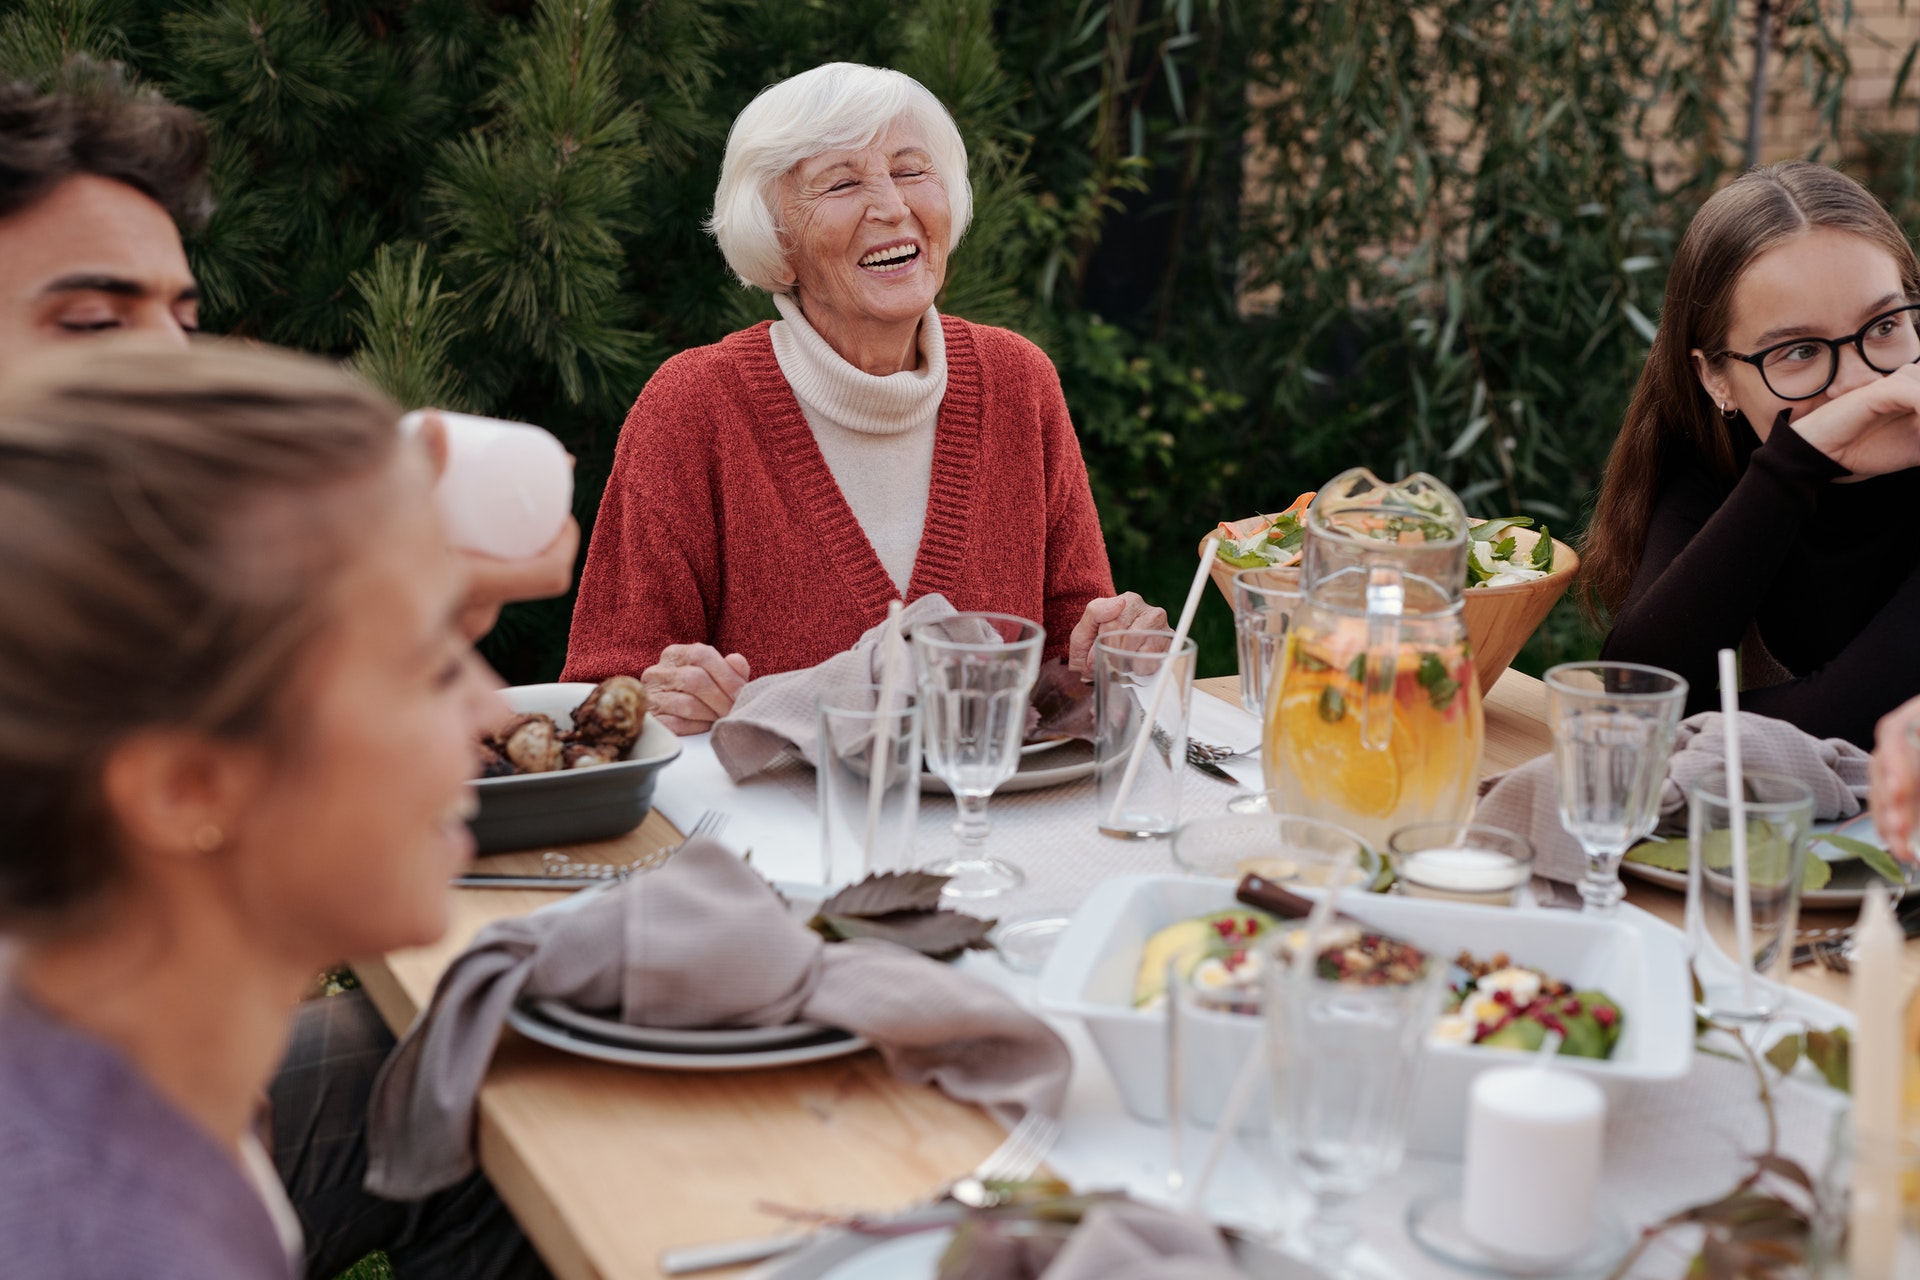 Group eating together including and elderly lady